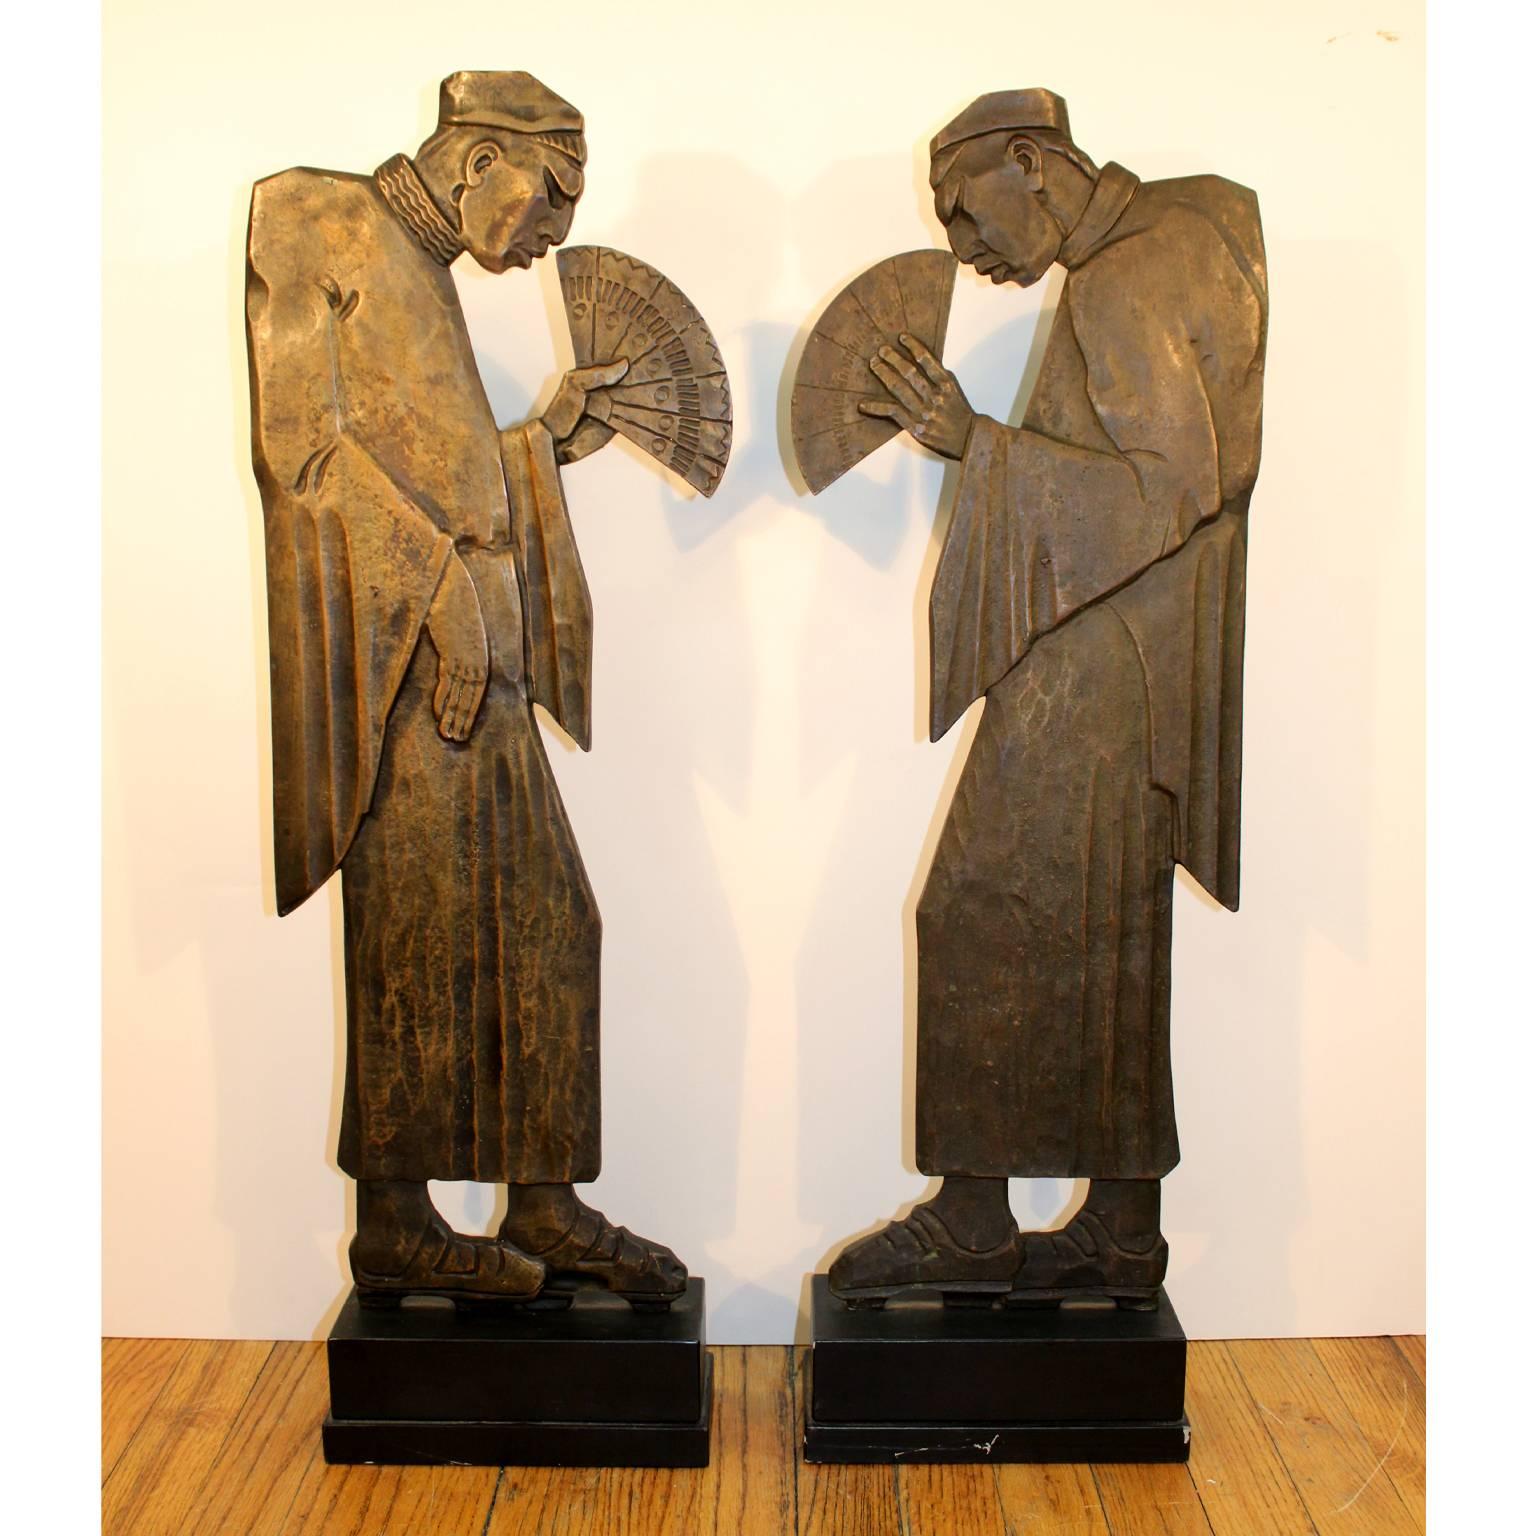 A pair of French Art Deco cast bronze sculptures of Chinese men holding fans. Dark bronze patina, unsigned. The pair was possibly part of the elements of a banister.